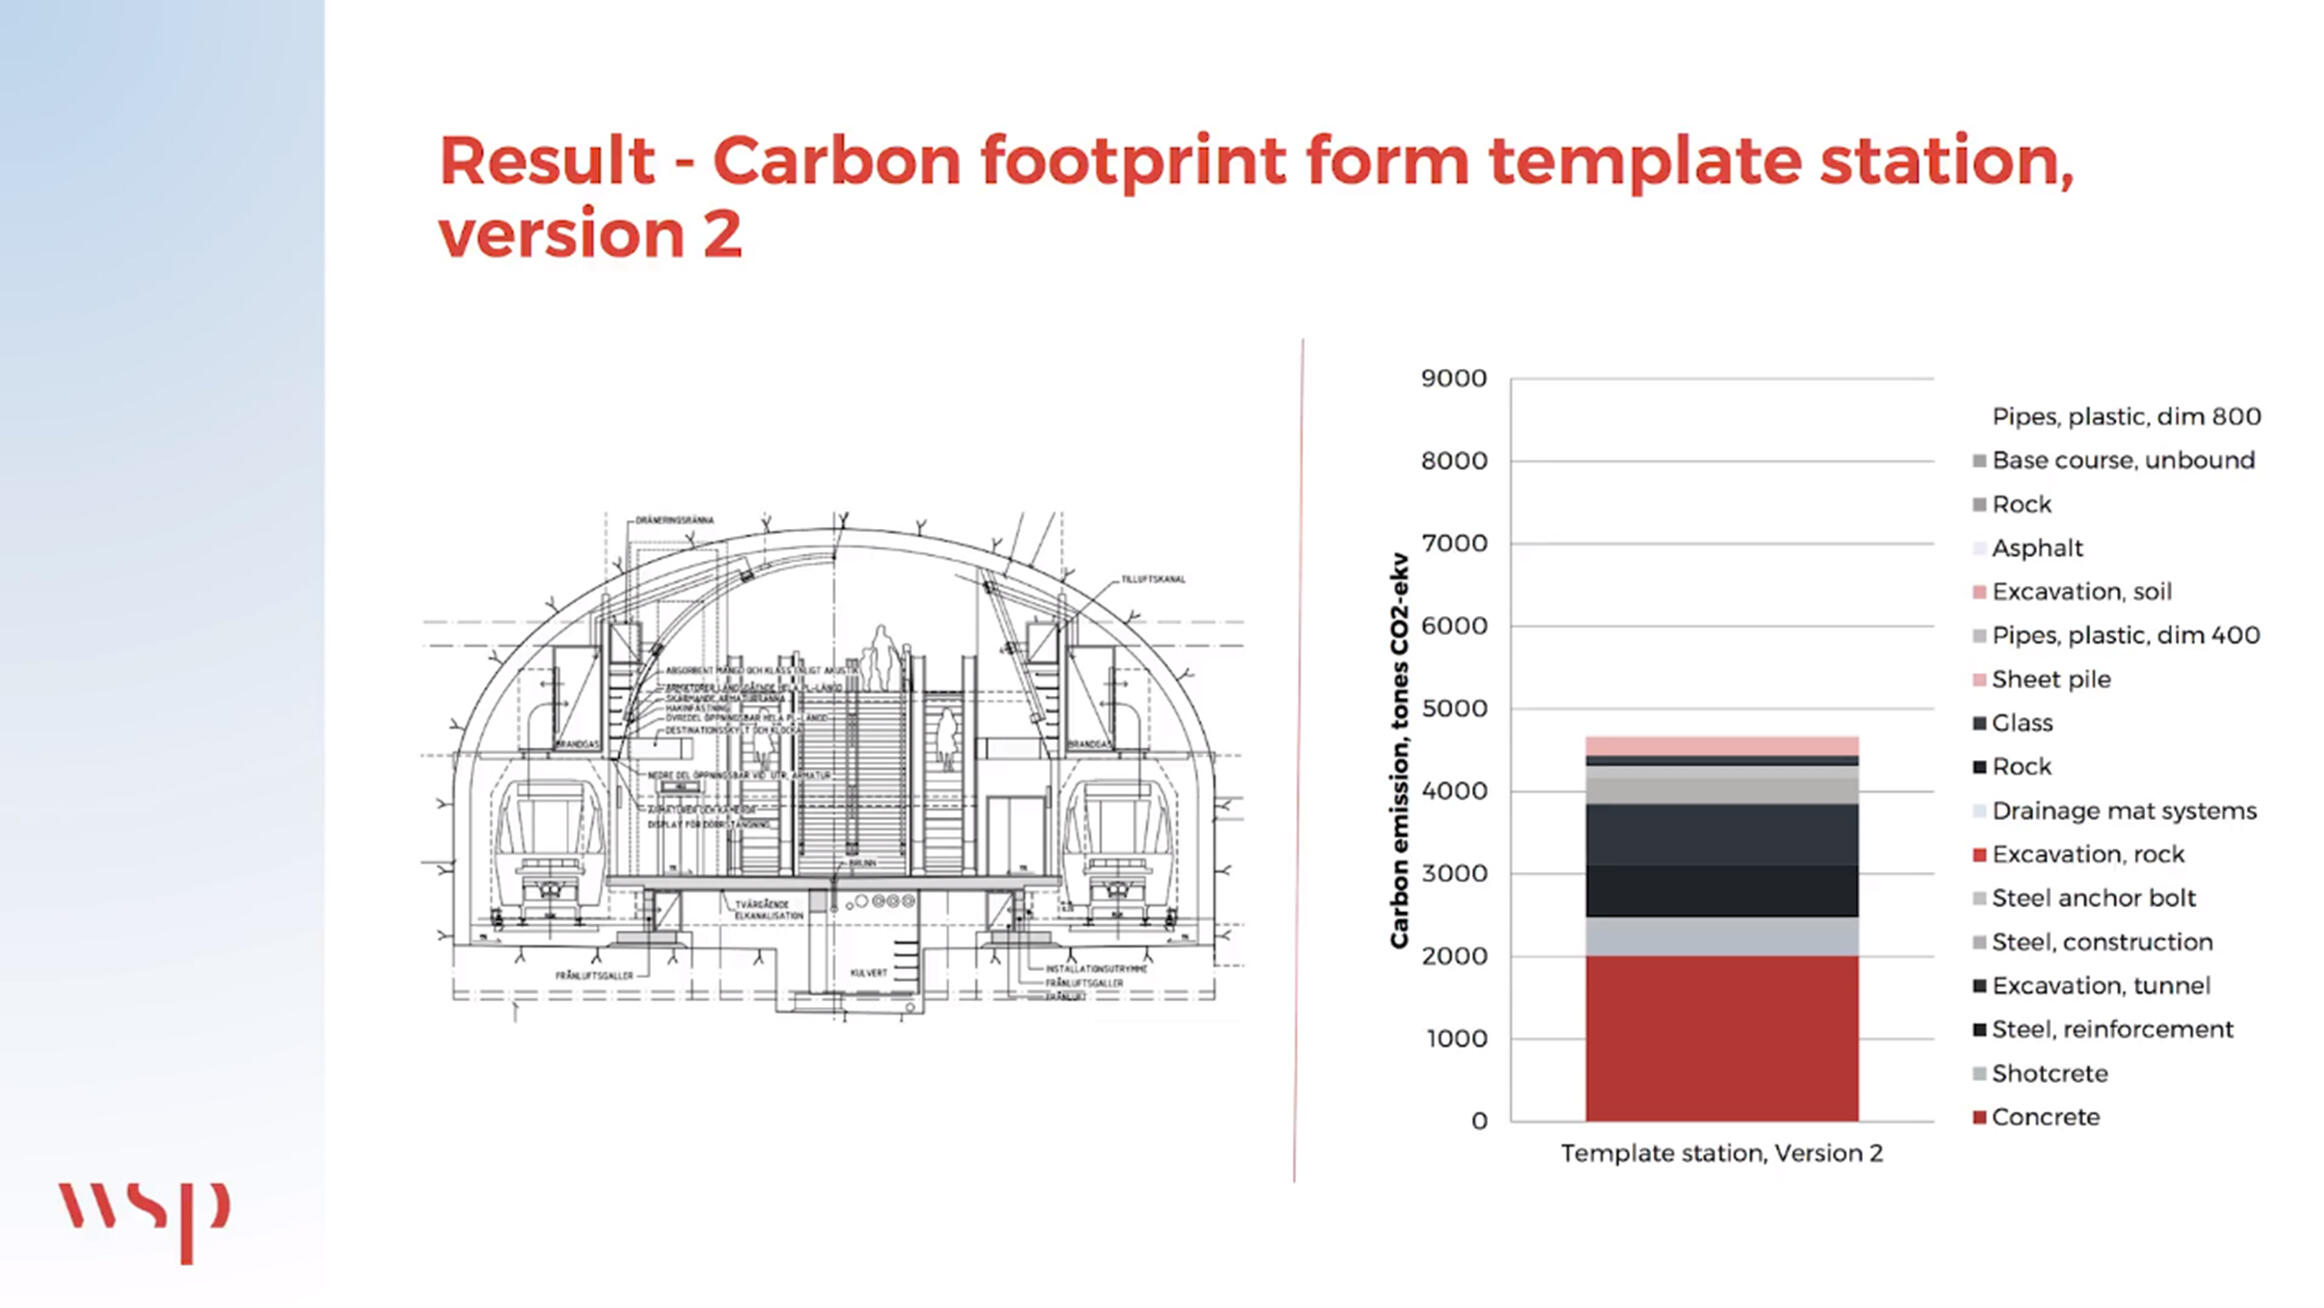 Carbon footprint for template station - version 2